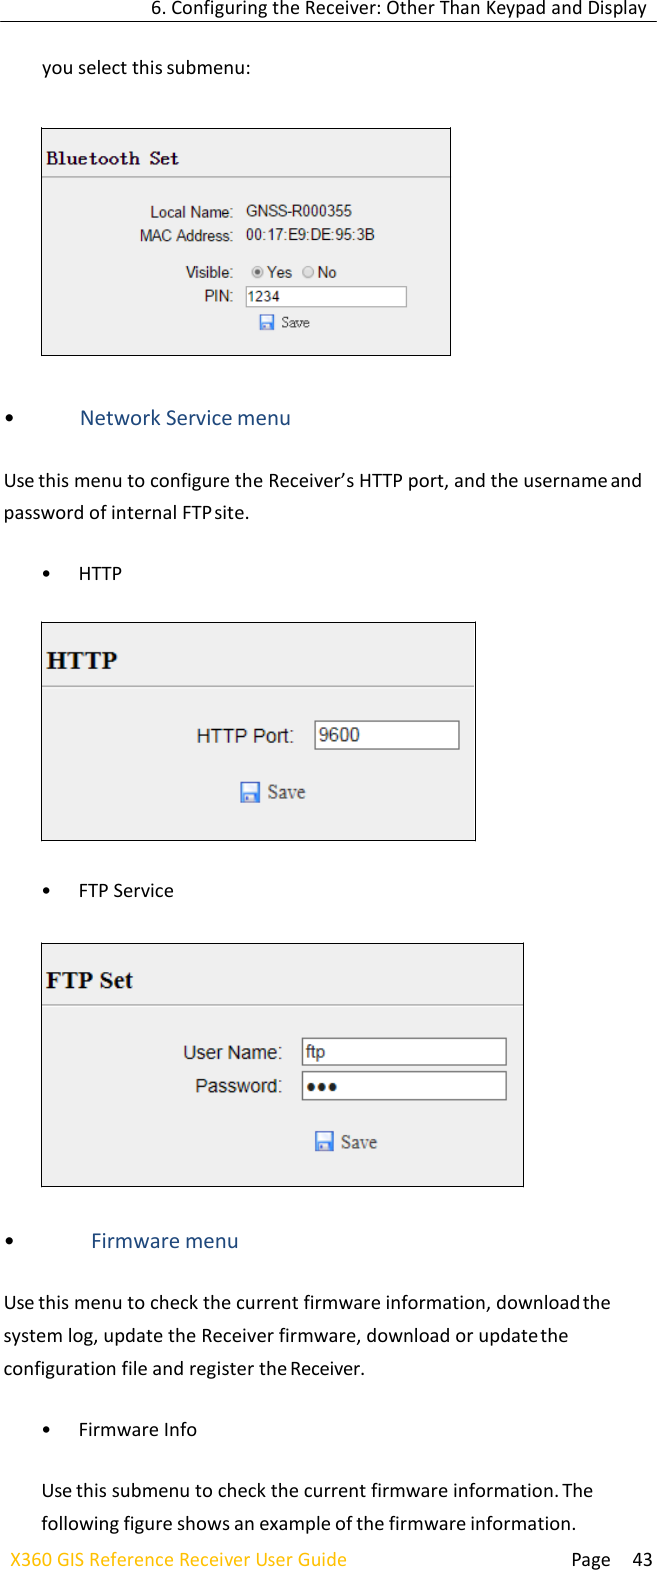 6. Configuring the Receiver: Other Than Keypad and Display  Page 43 X360 GIS Reference Receiver User Guide    you select this submenu:      • Network Service menu  Use this menu to configure the Receiver’s HTTP port, and the username and password of internal FTP site.  • HTTP    • FTP Service     • Firmware menu  Use this menu to check the current firmware information, download the system log, update the Receiver firmware, download or update the configuration file and register the Receiver.  • Firmware Info  Use this submenu to check the current firmware information. The following figure shows an example of the firmware information.       